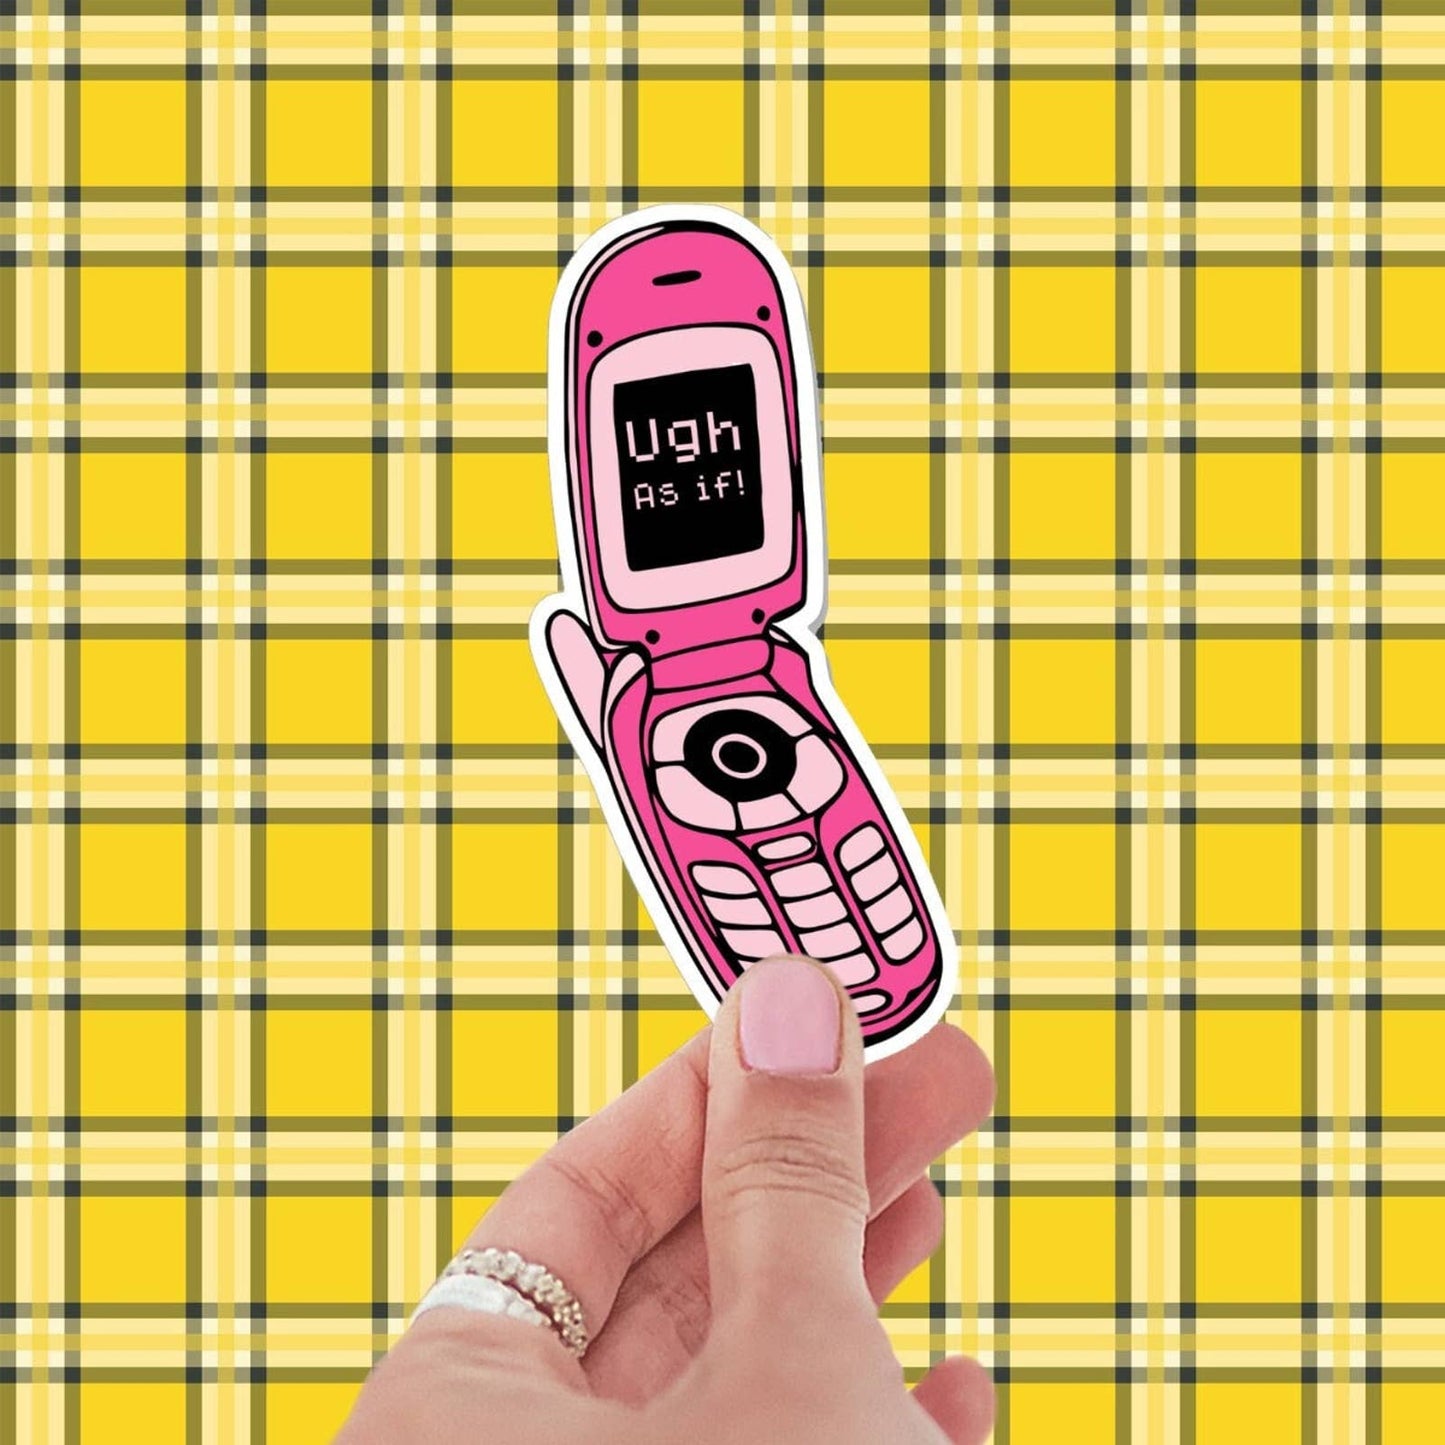 Ugh As If! Flip Phone sticker, funny stickers, stickers for laptop